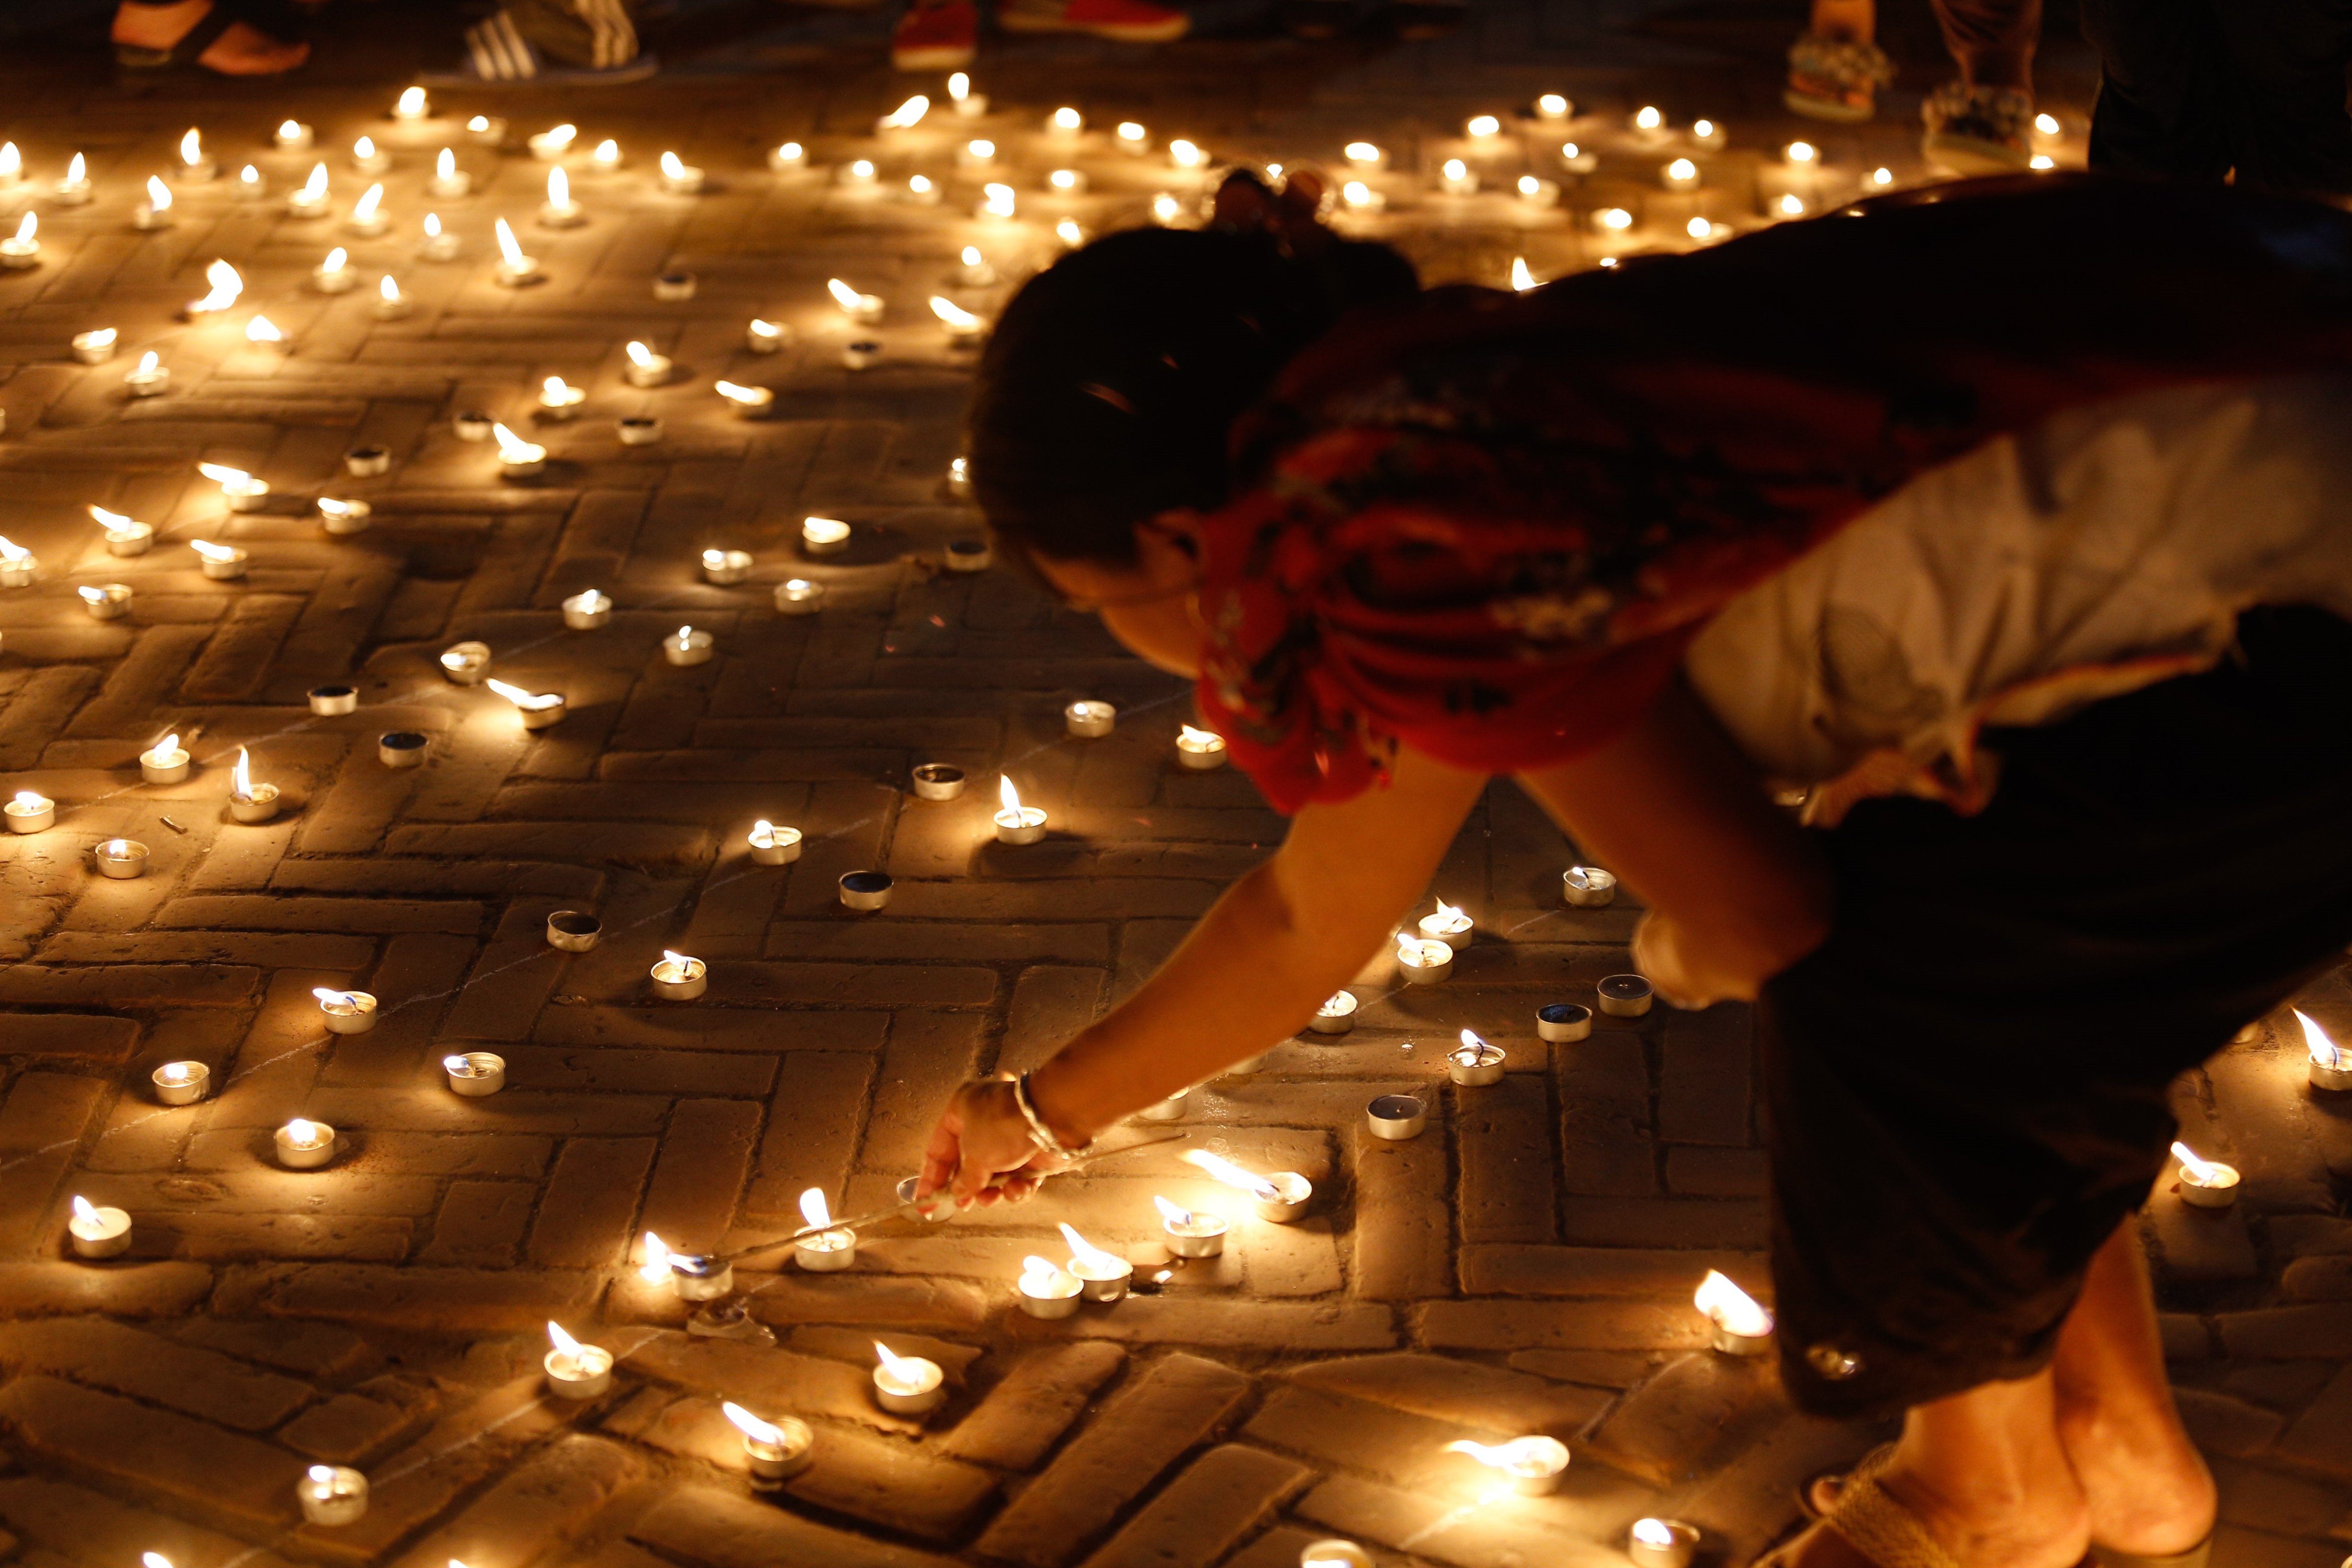 Nepalese woman lights a candle to pay homage to earthquake victims as they mark the 1st anniversary in Kathmandu, Nepal on April 24, 2016. (Anadolu Agency—Getty Images)